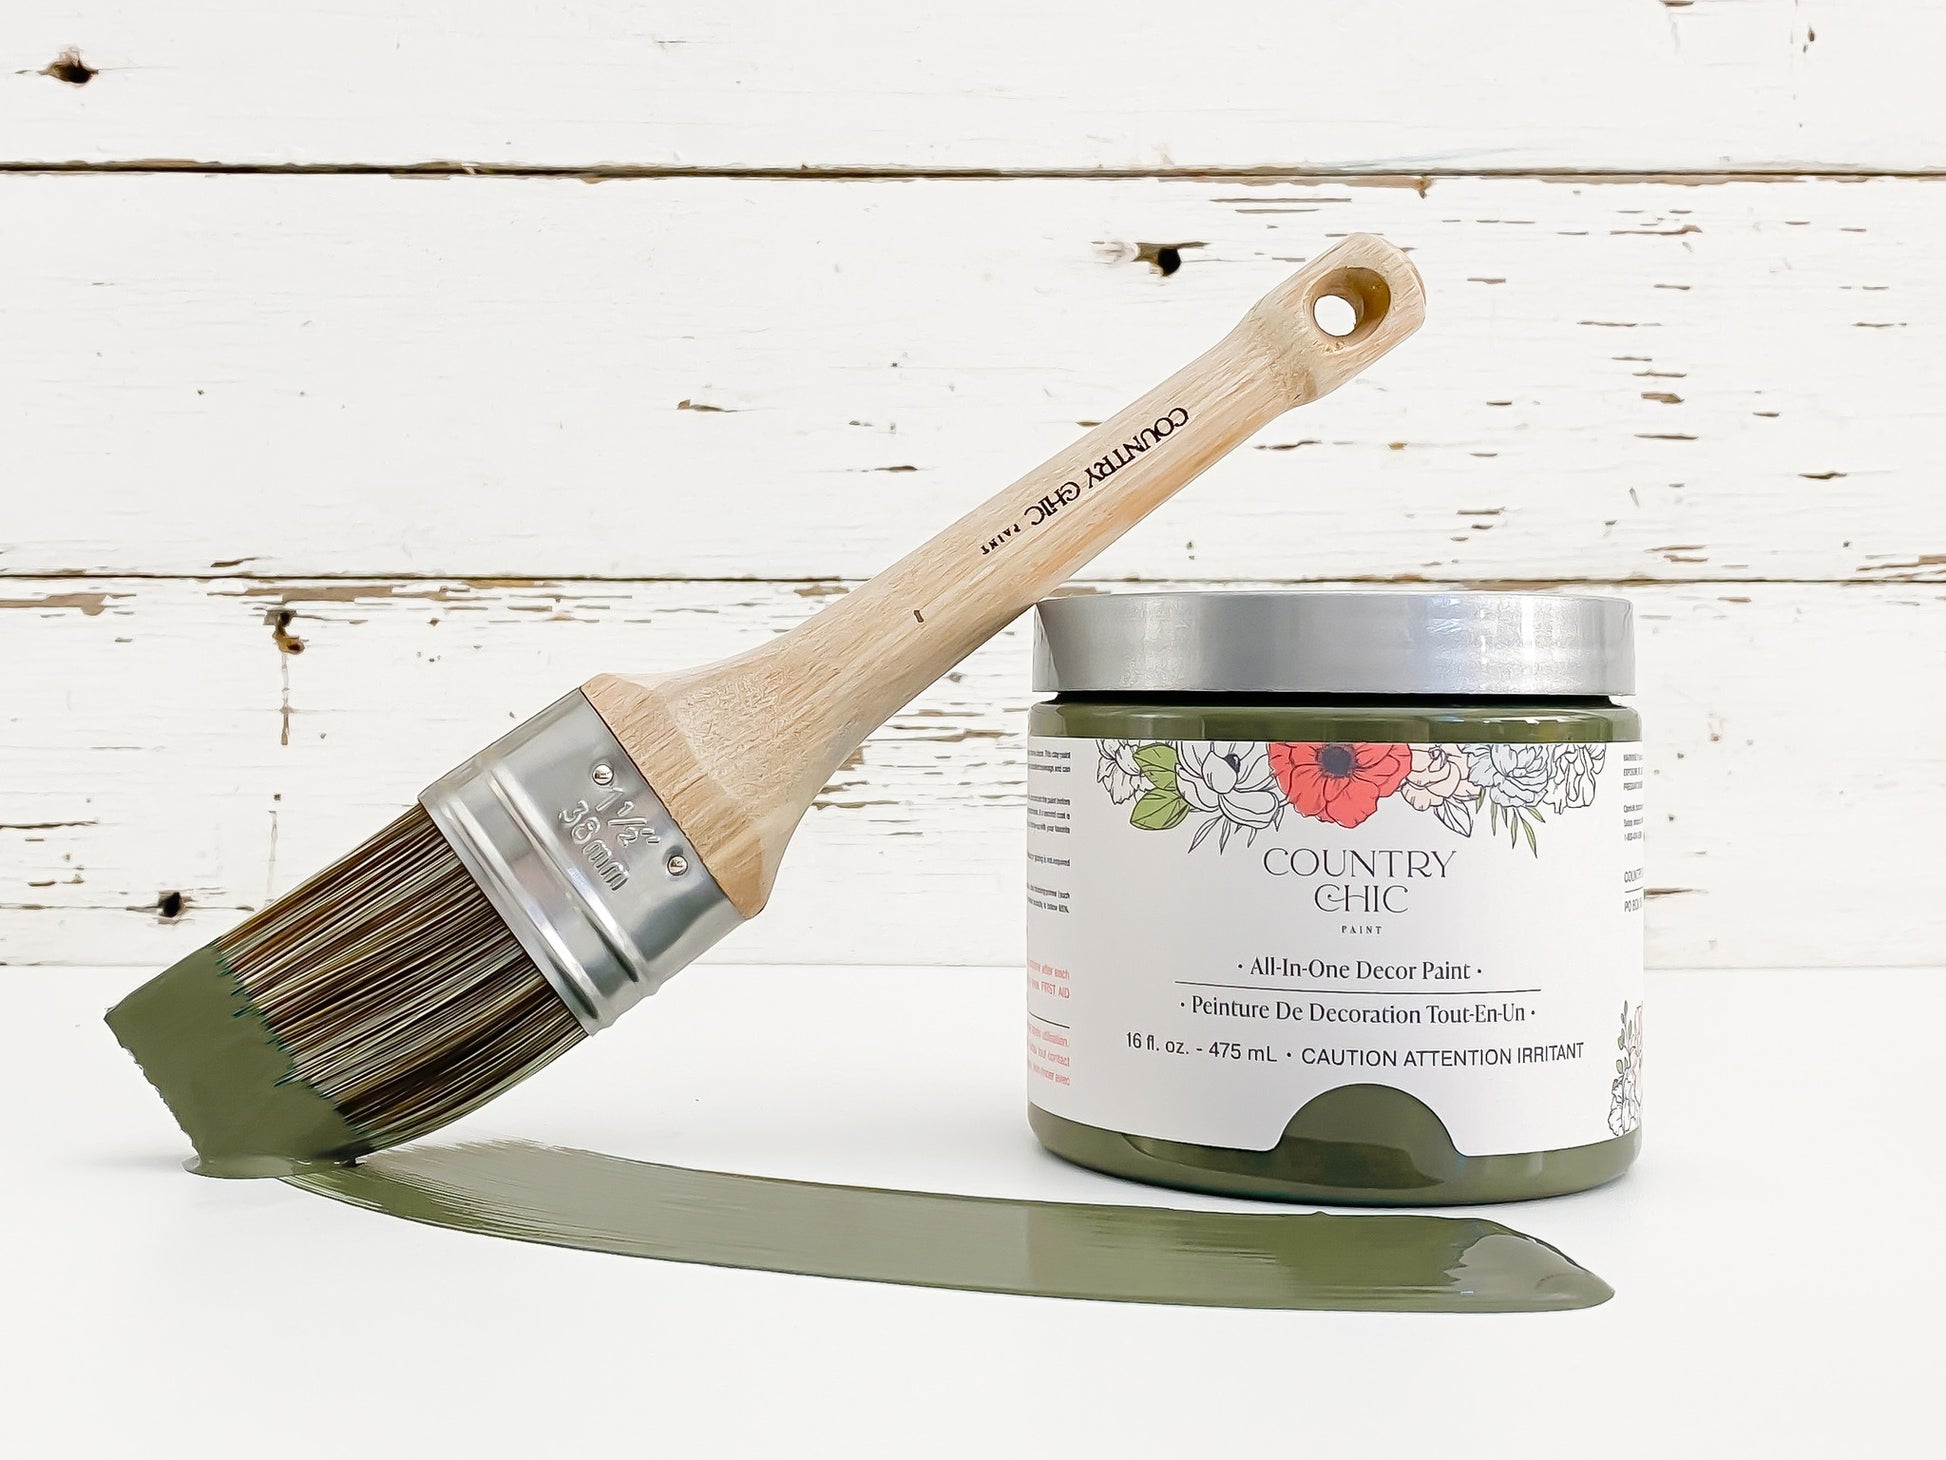 Country Chic - All in One Decor Paint - Neverland